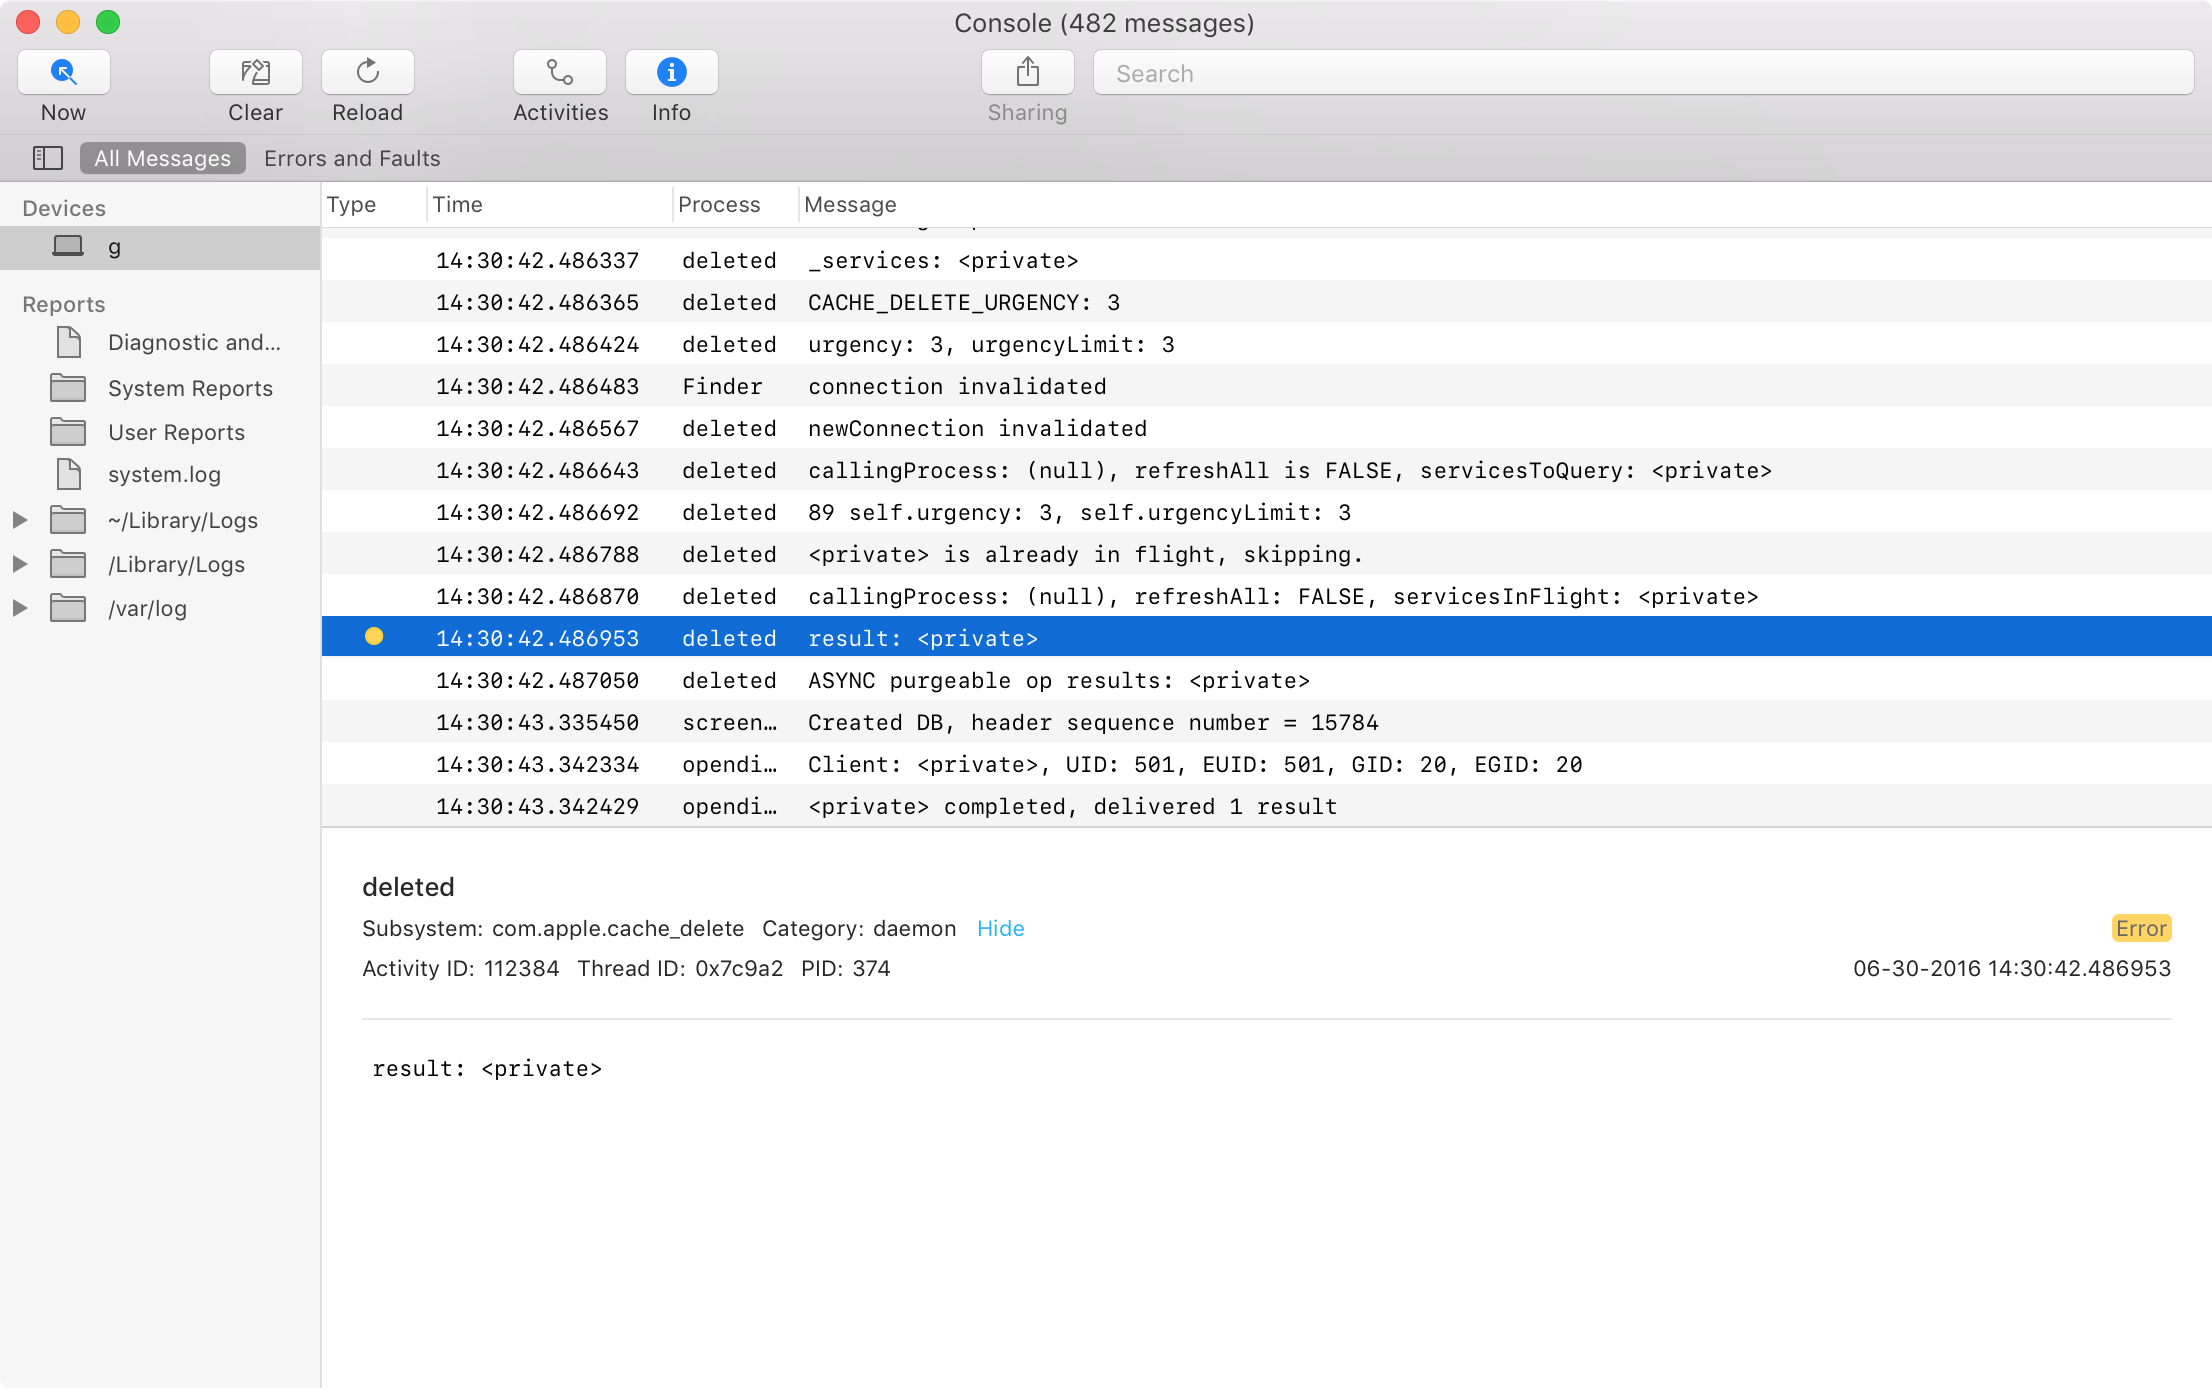 Logs in macOS Sierra's Console app can show other device logs such as iOS devices